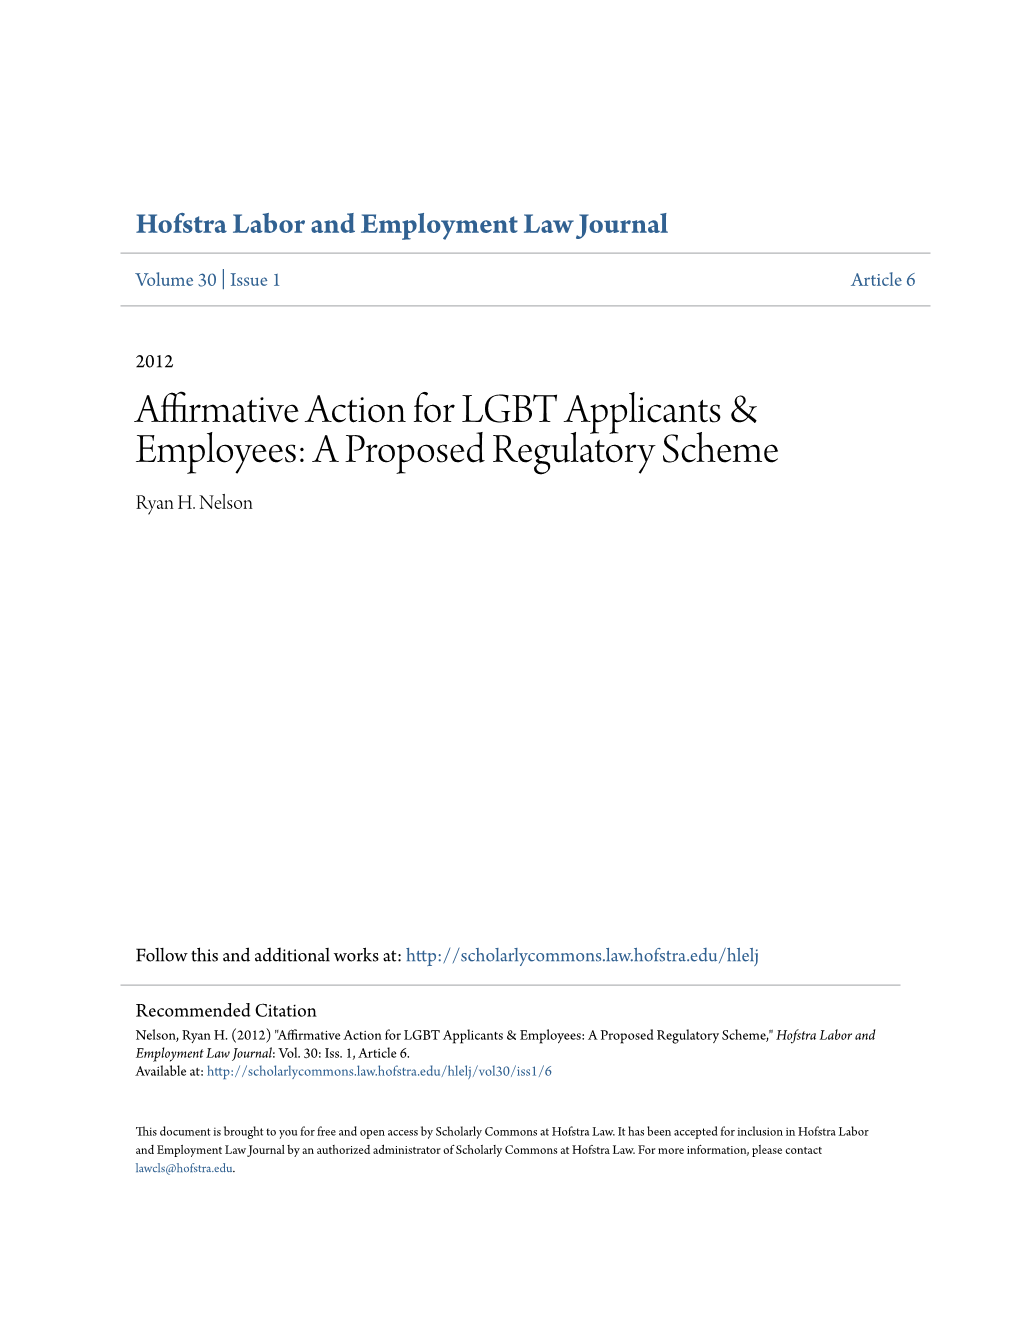 Affirmative Action for LGBT Applicants & Employees